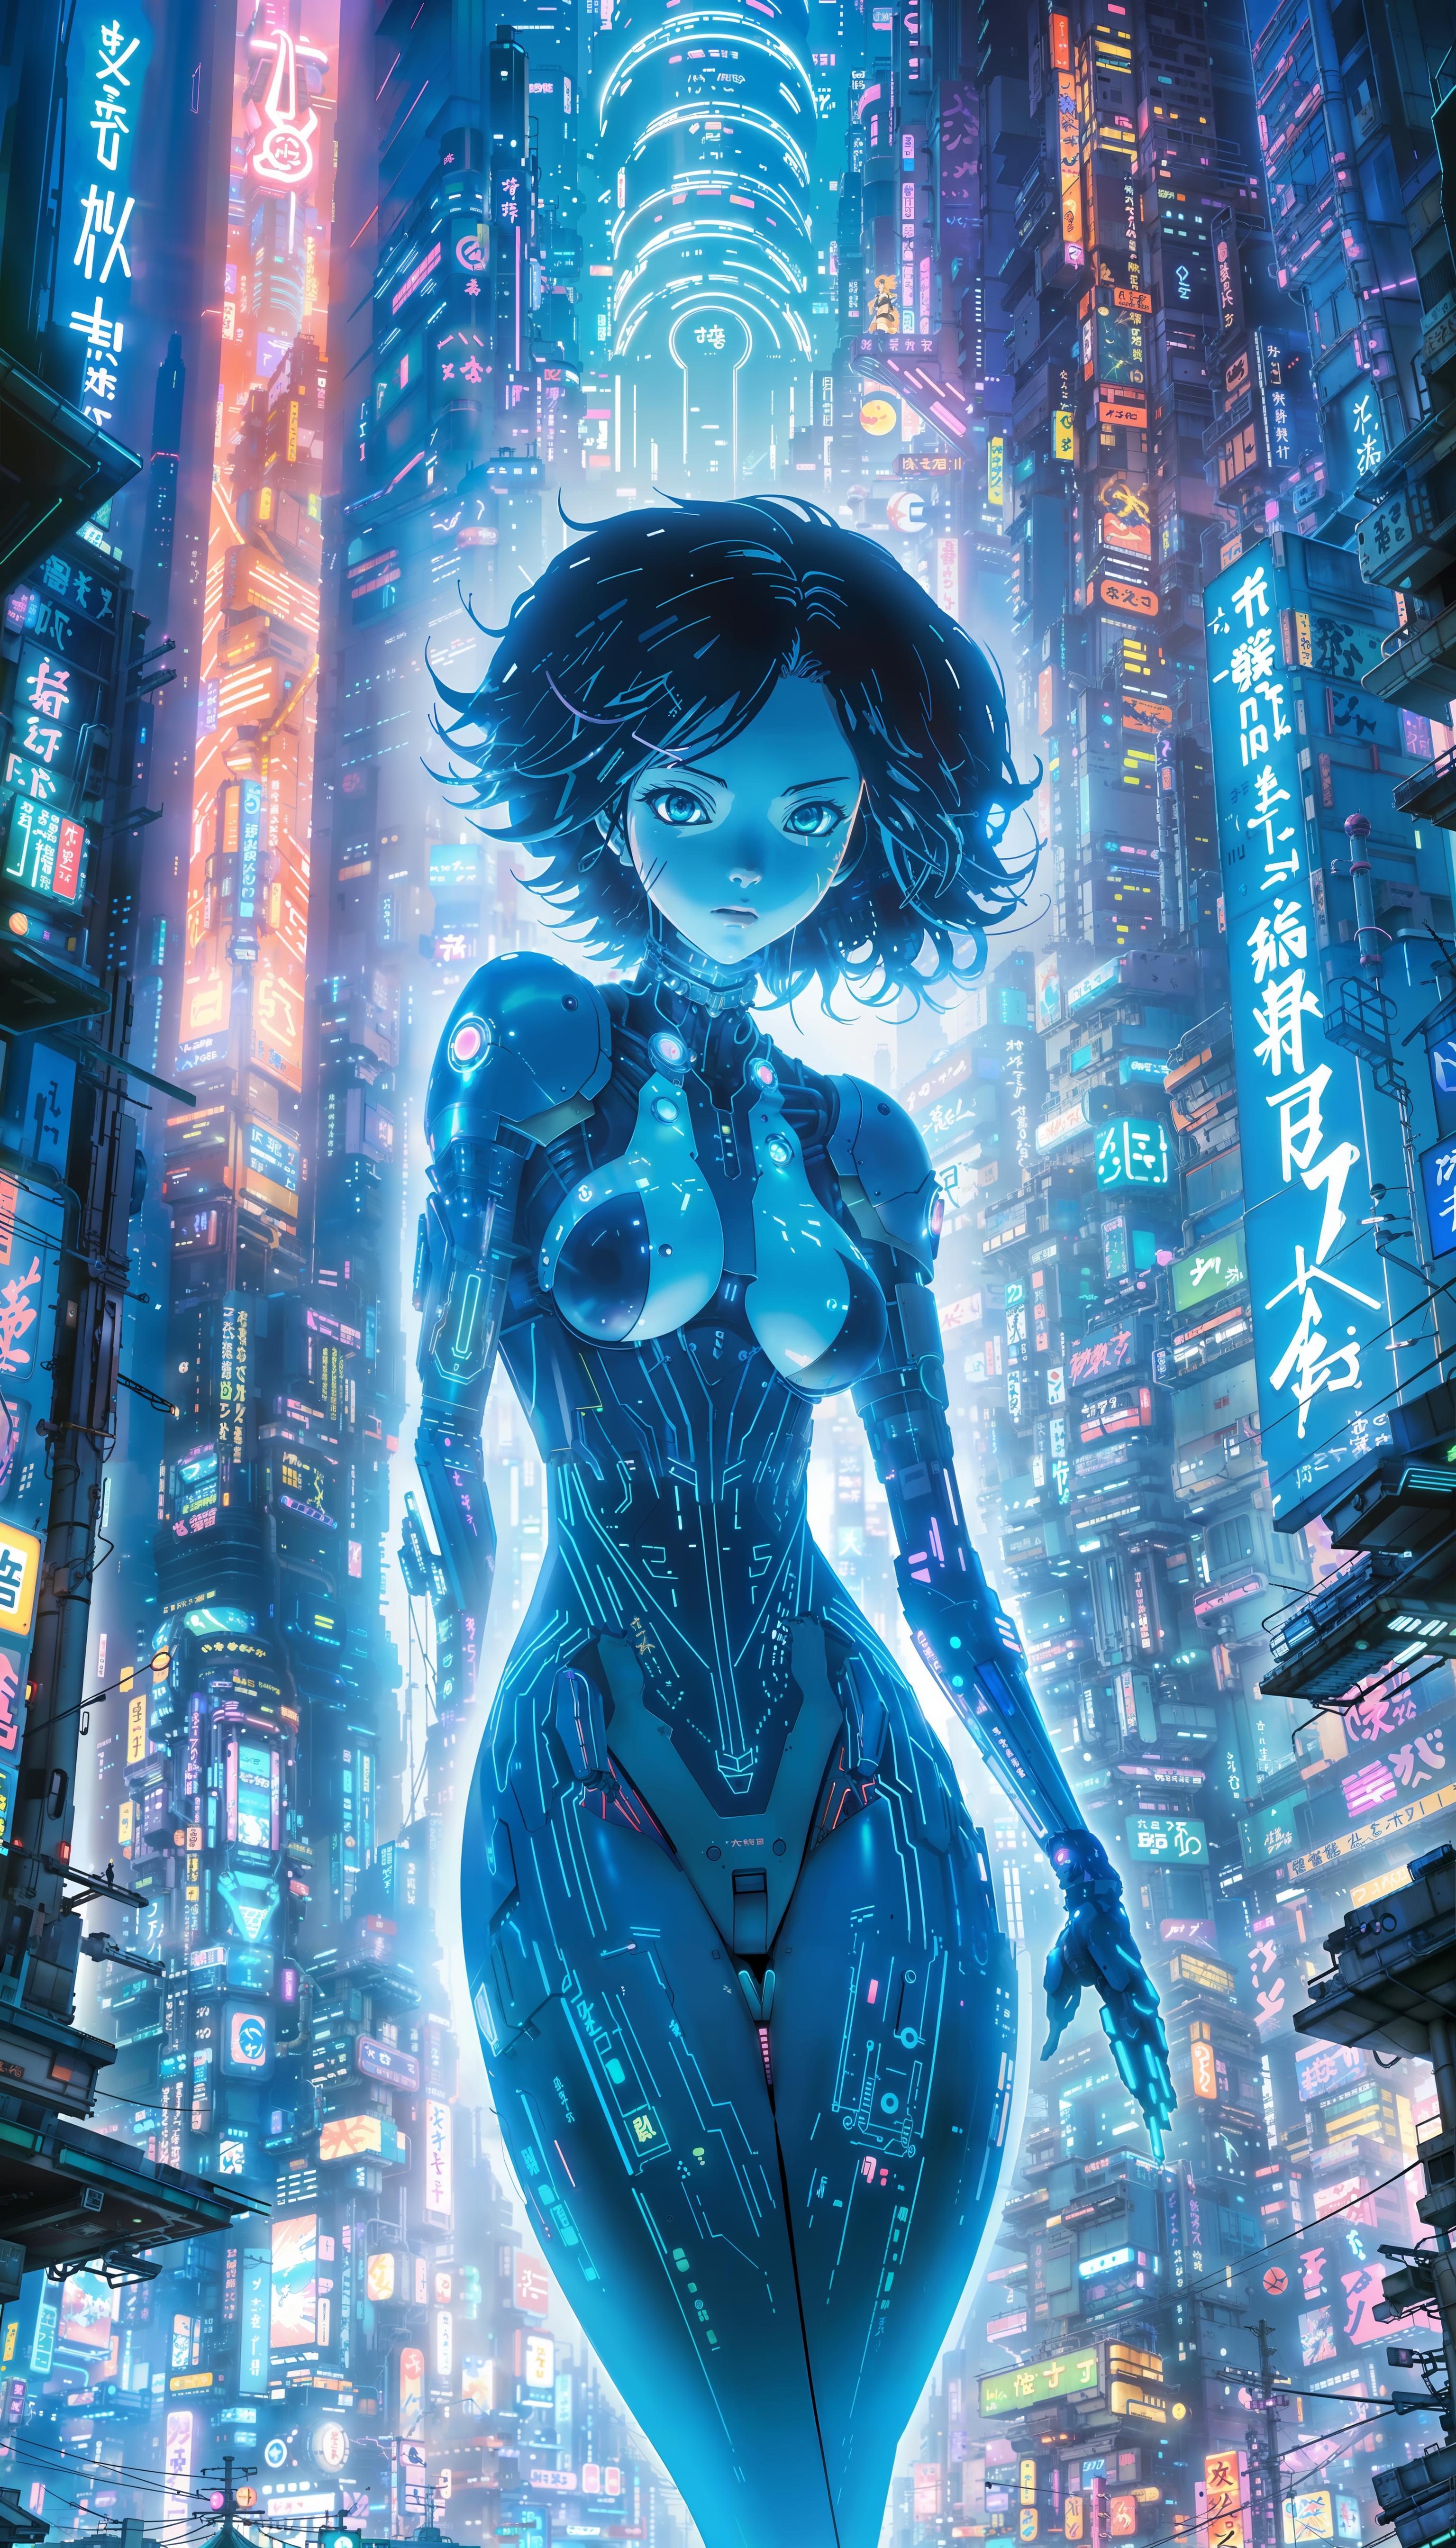 "Cyberpunk Cityscape with a Robotic Woman"